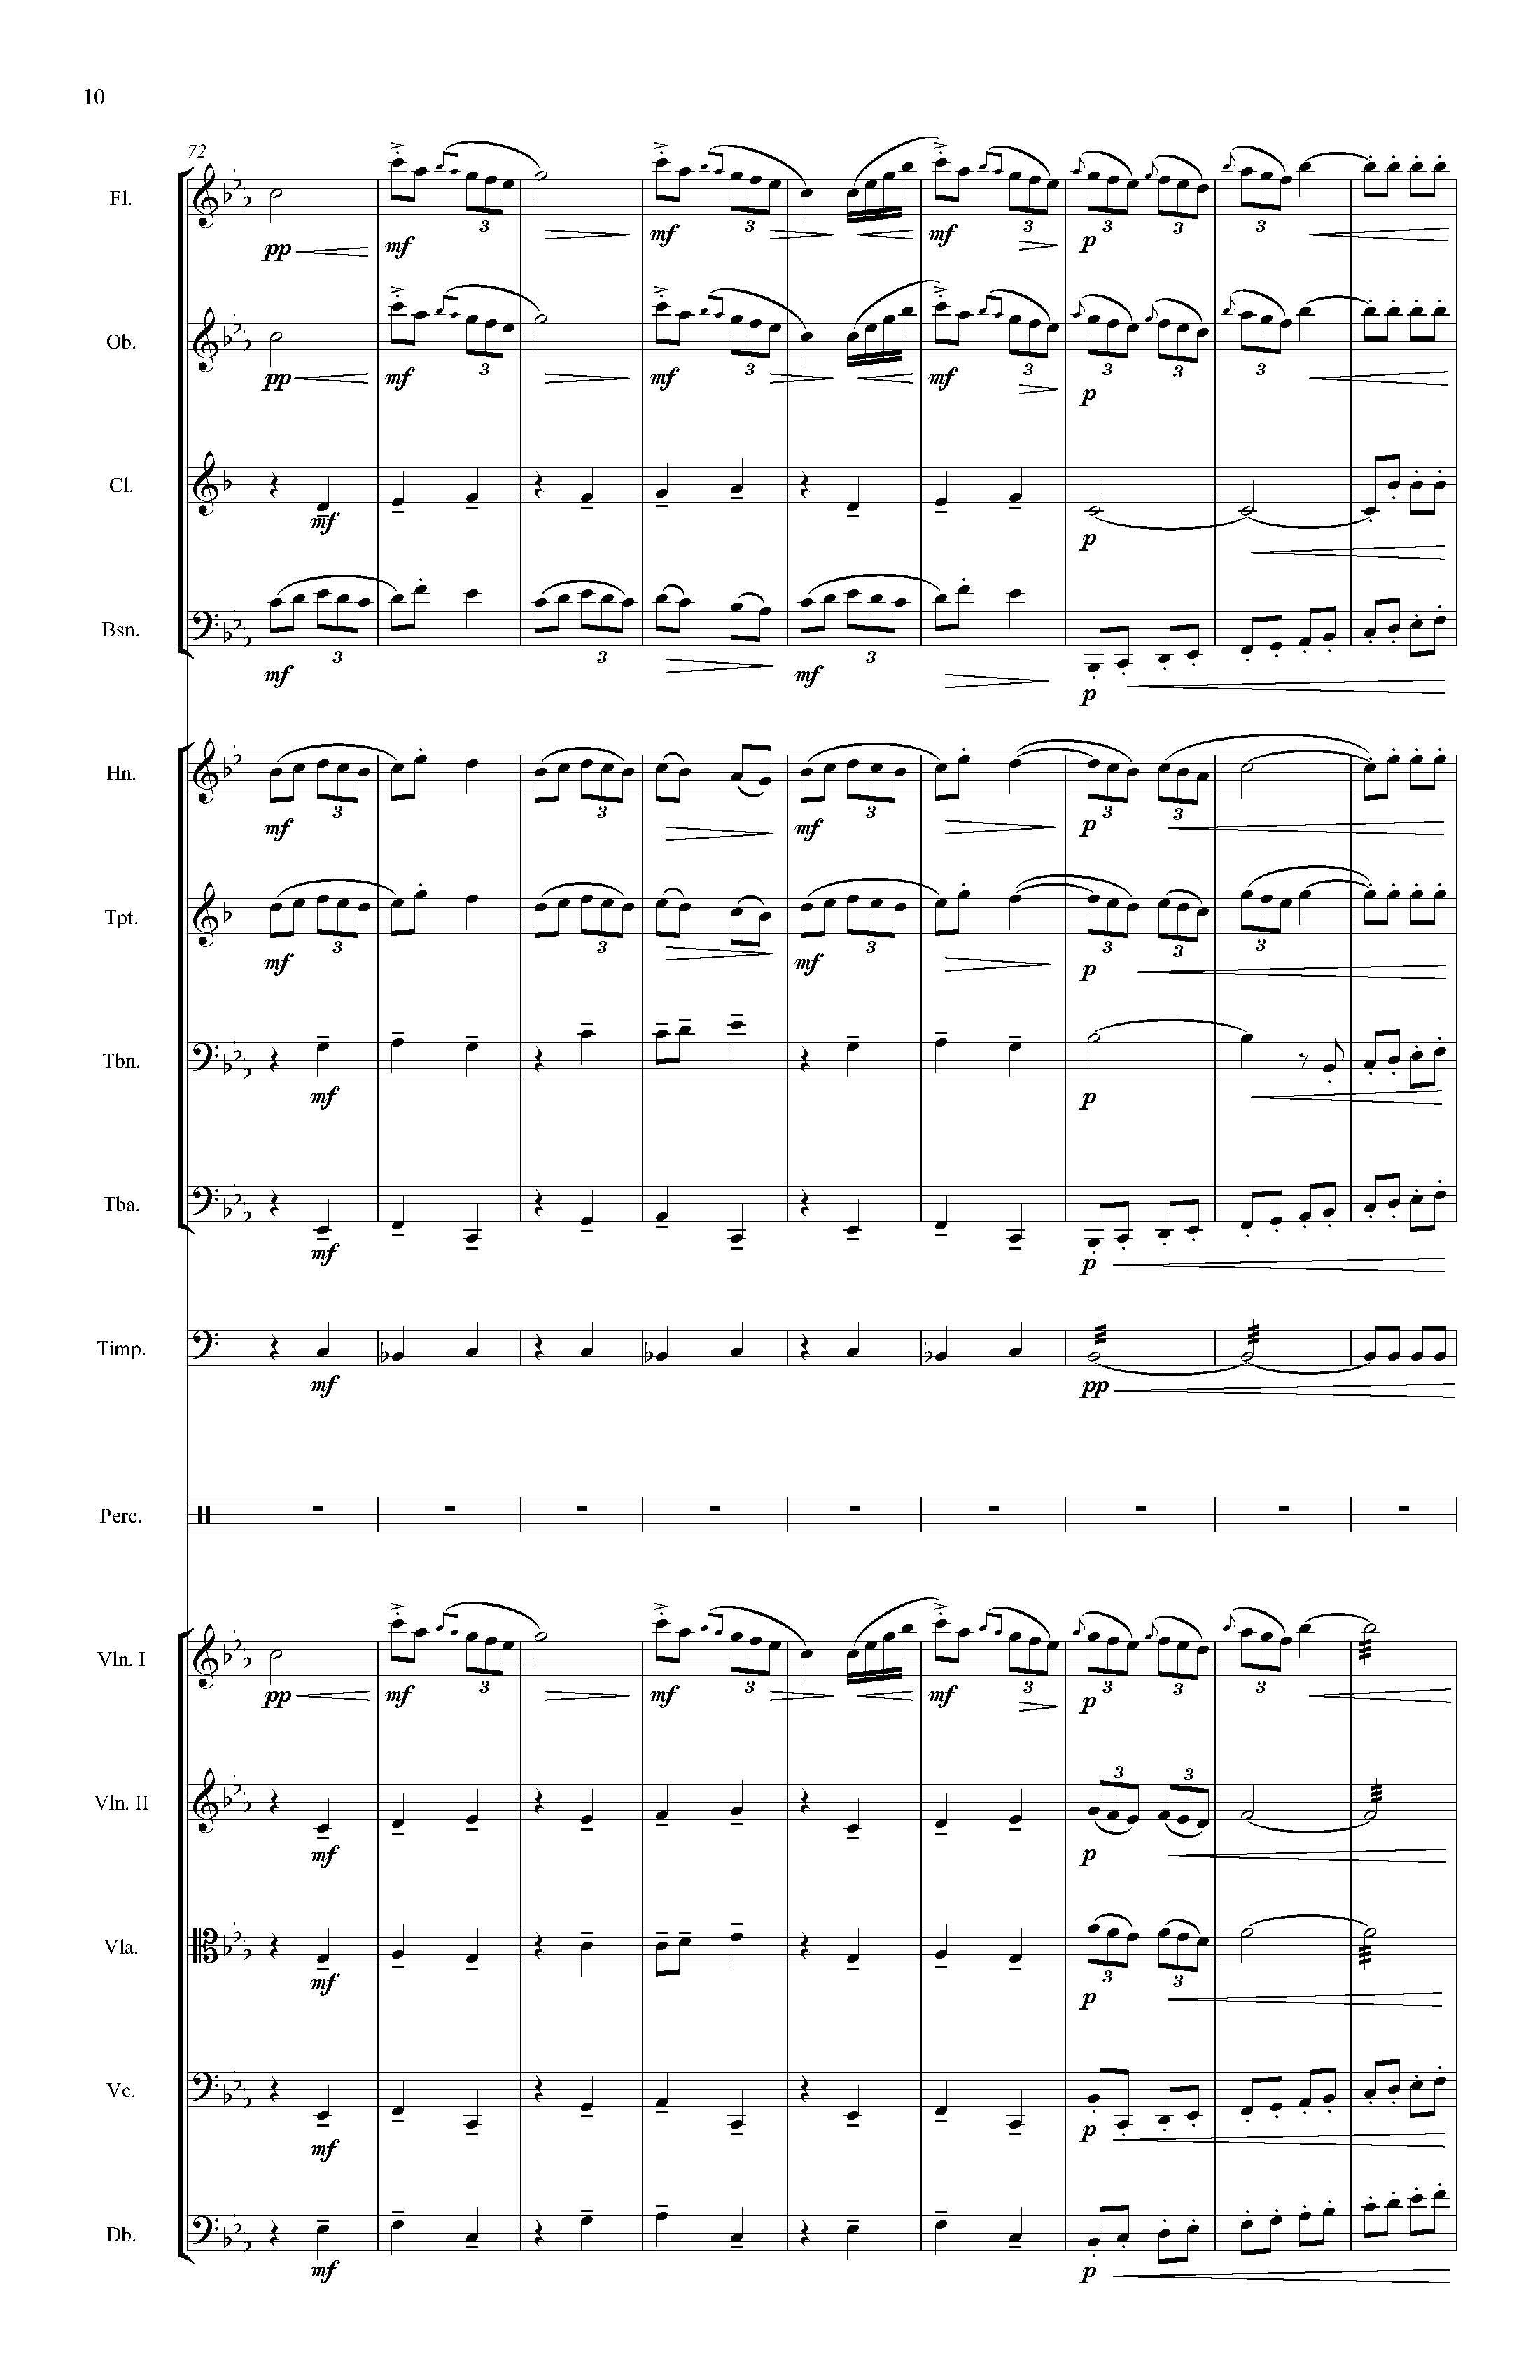 Fantasy on a French Carol - Complete Score_Page_14.jpg